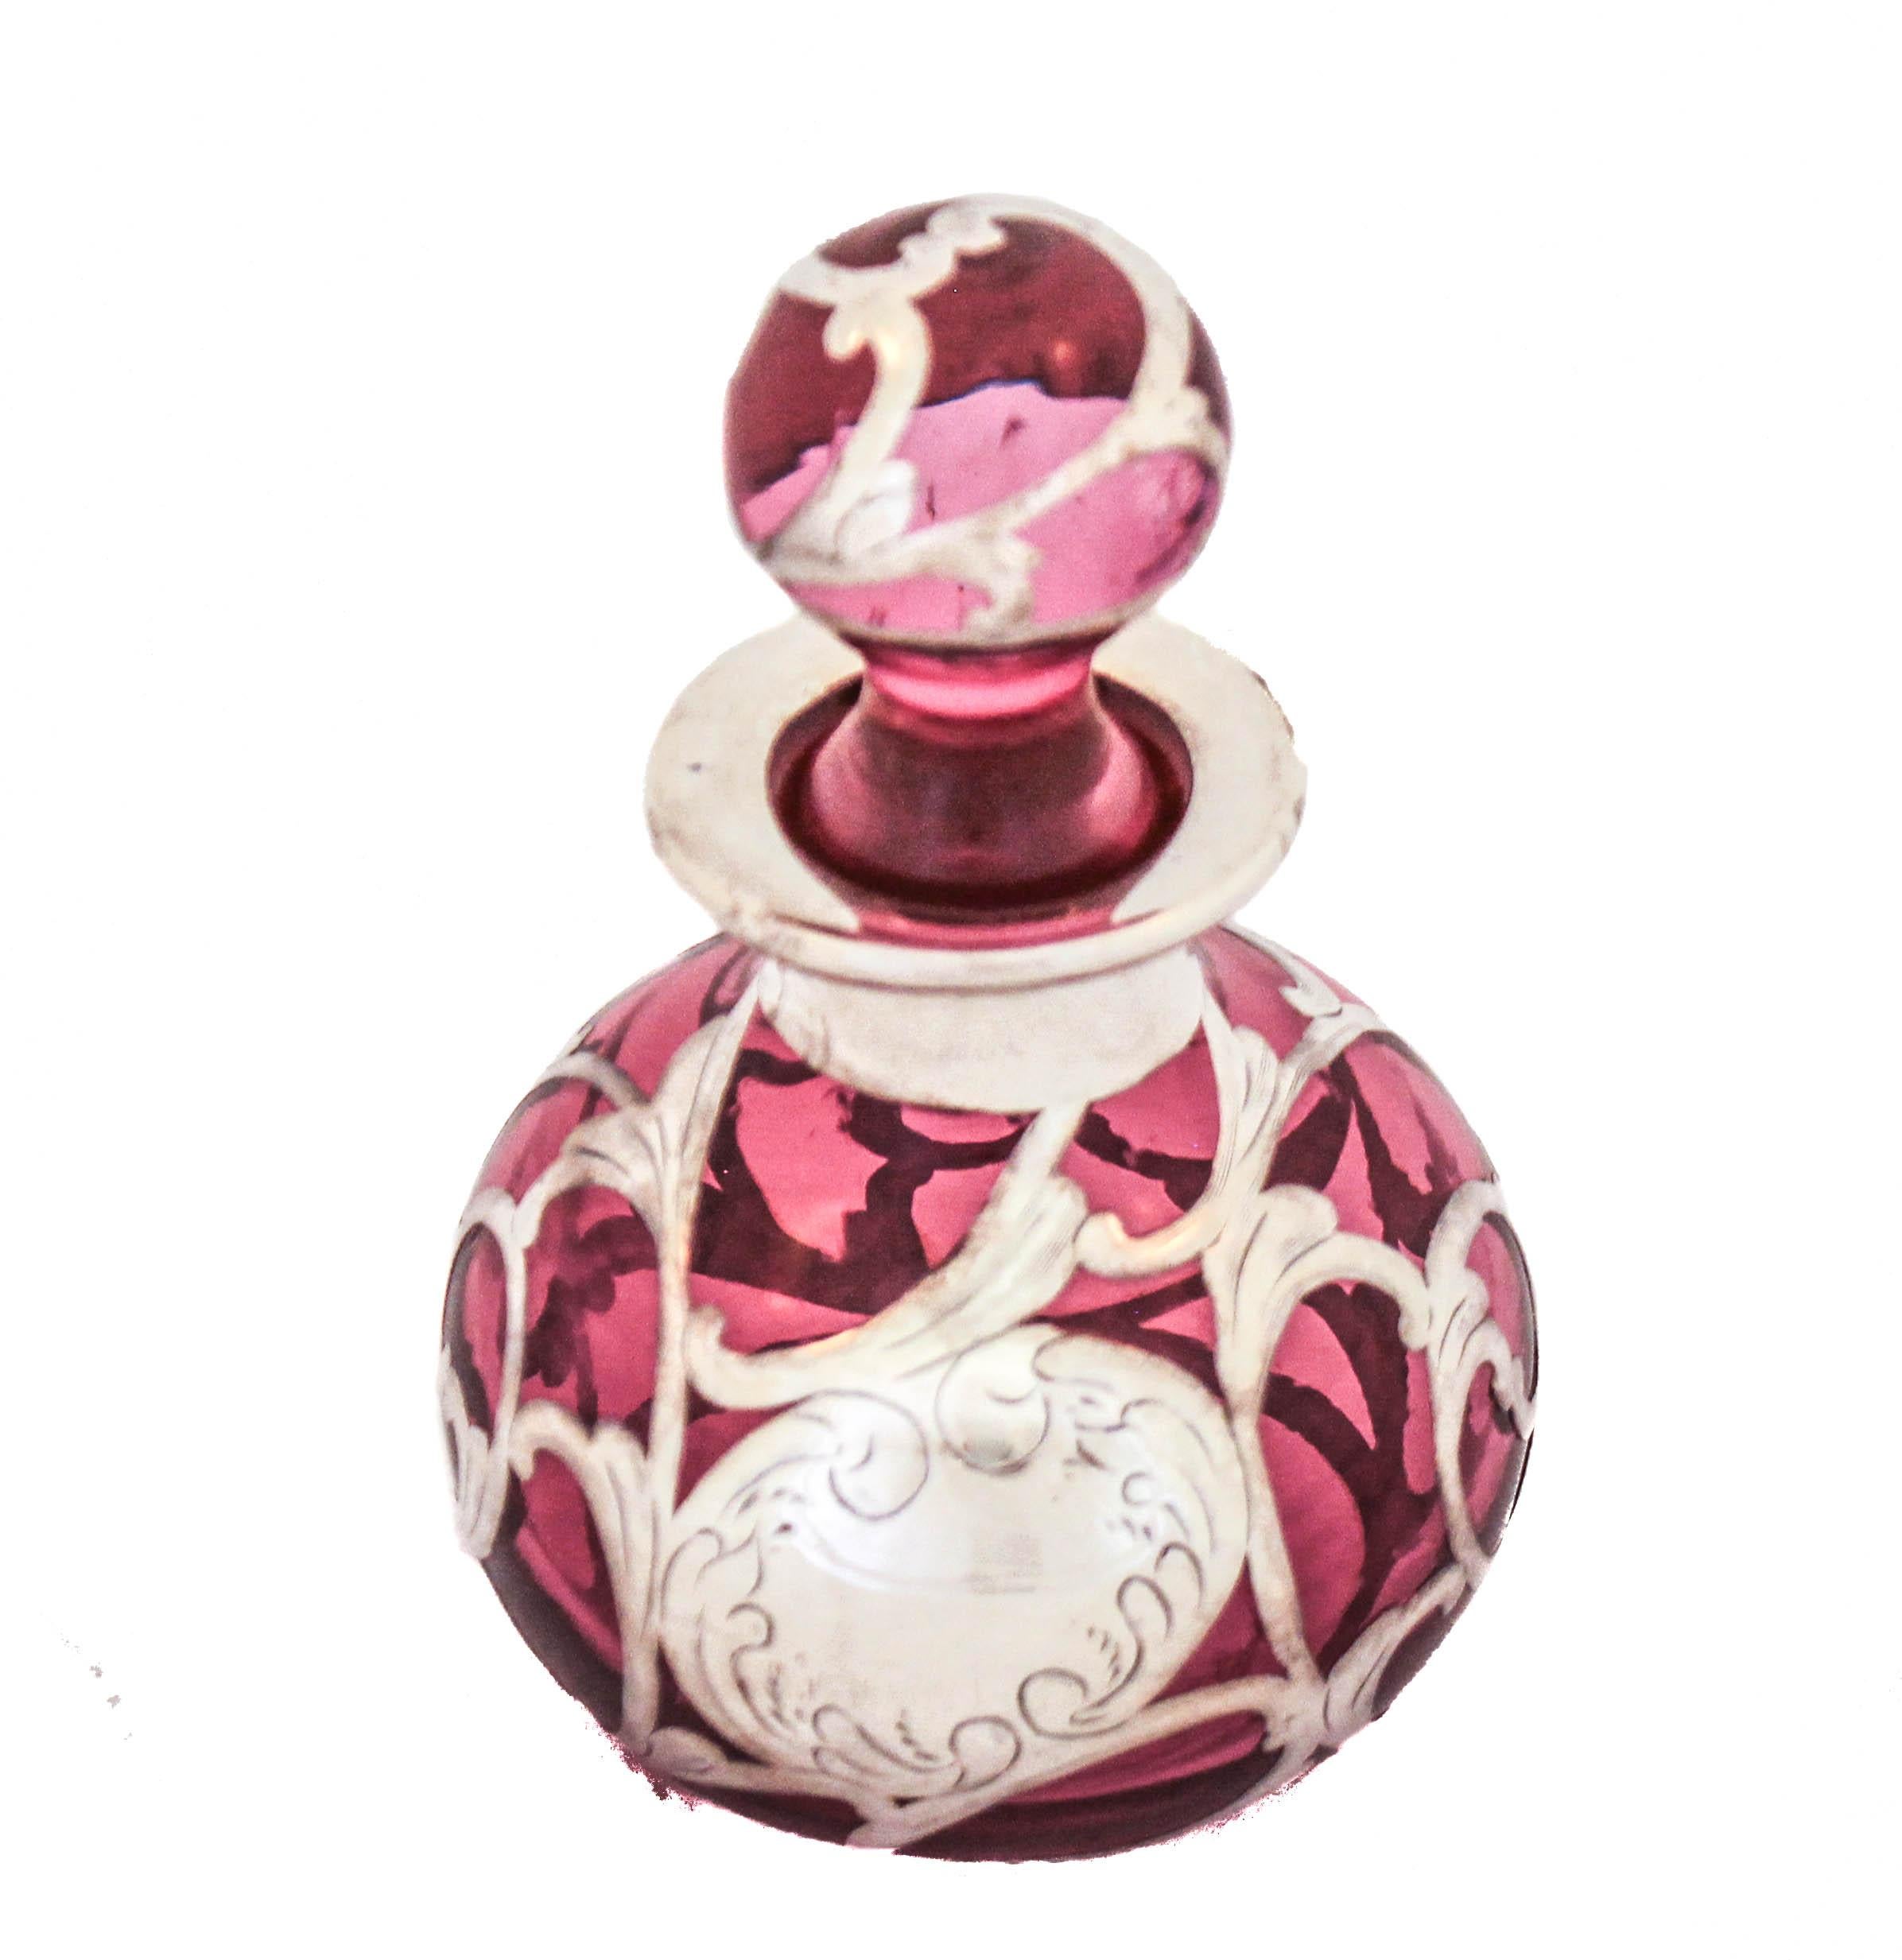 Being offered is a sterling silver Art Nouveau overlay perfume bottle.  This bottle has cranberry-red colored glass with silver overlay of swirls, flowers and leaves motif all around.  Unlike most overlay glass that has a dark red color this one is